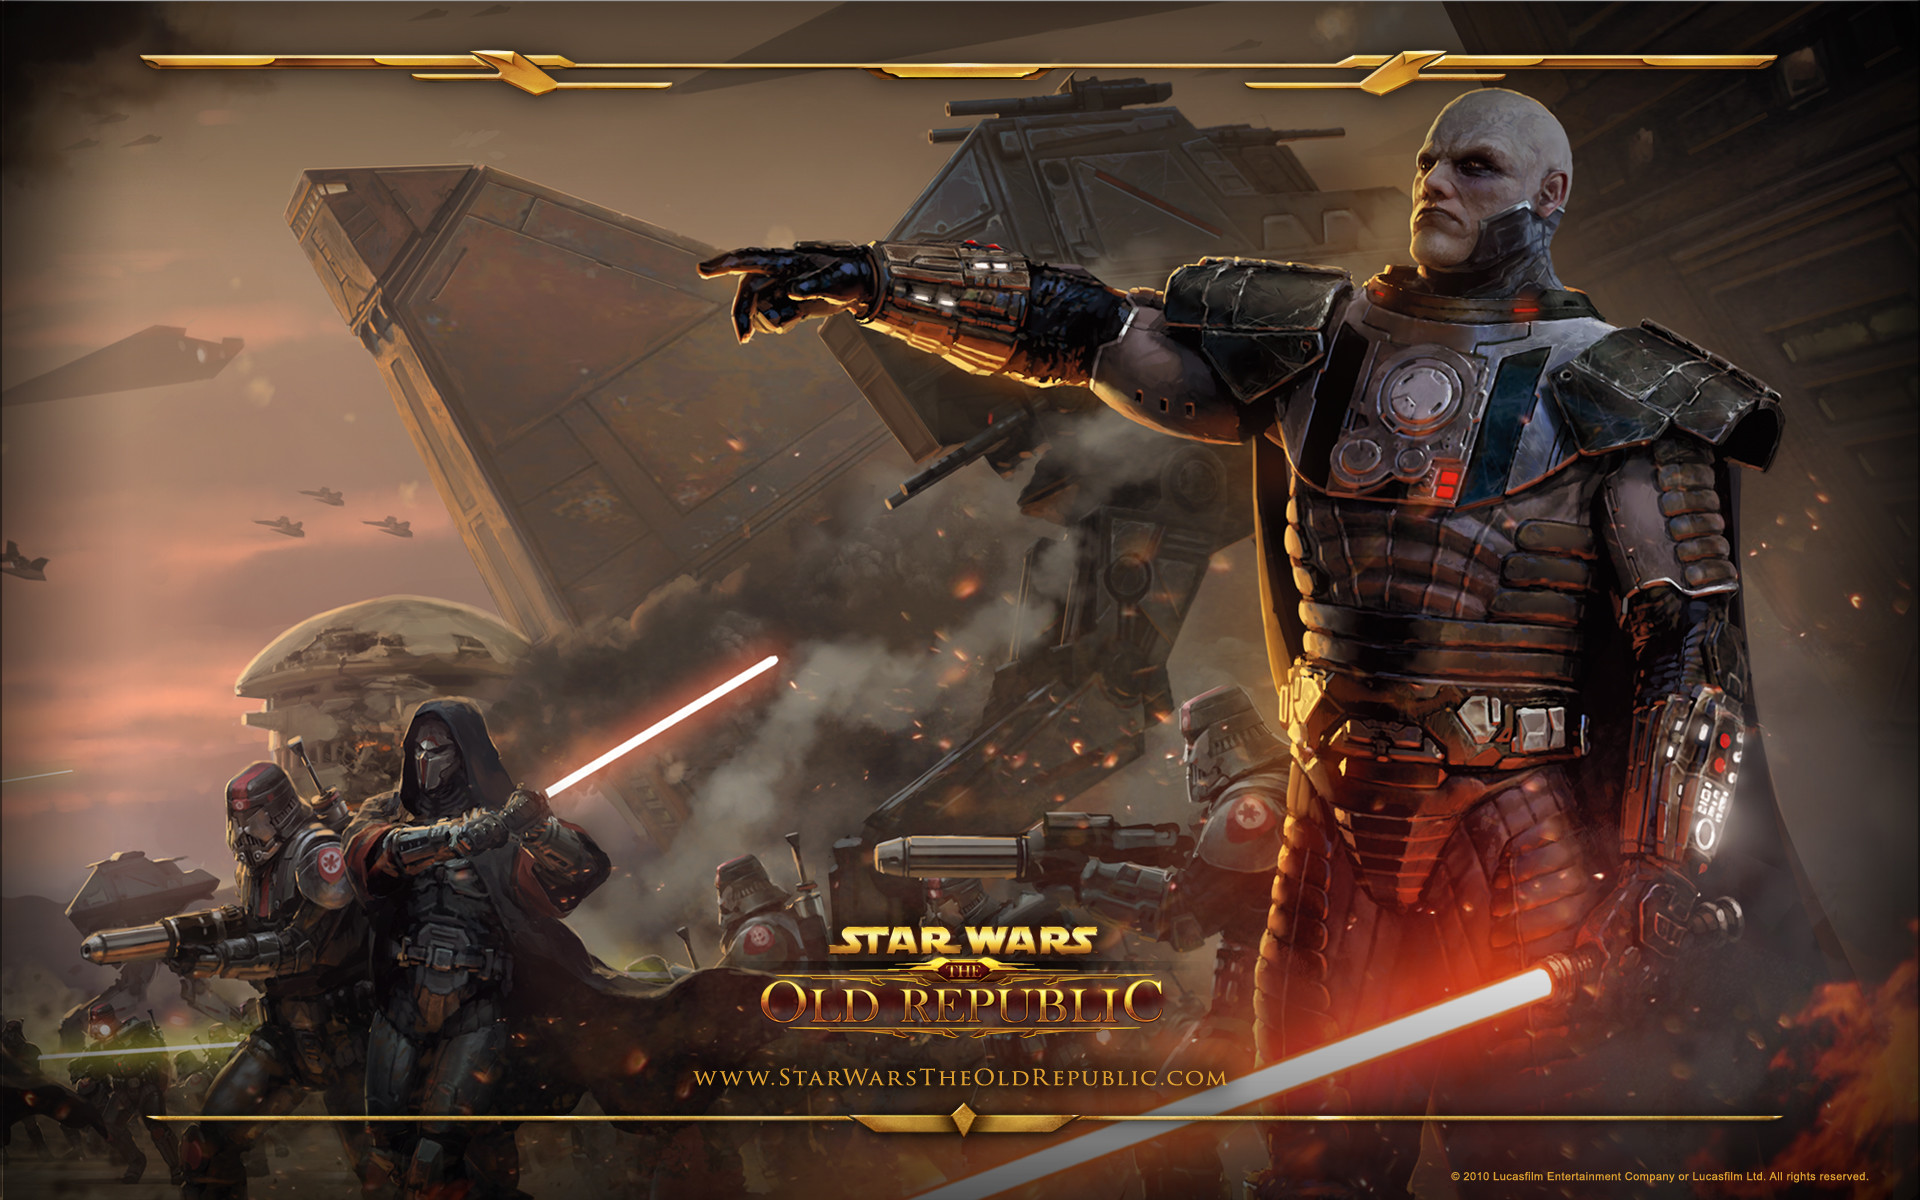 Star Wars: The Old Republic Wallpaper Sith Armt